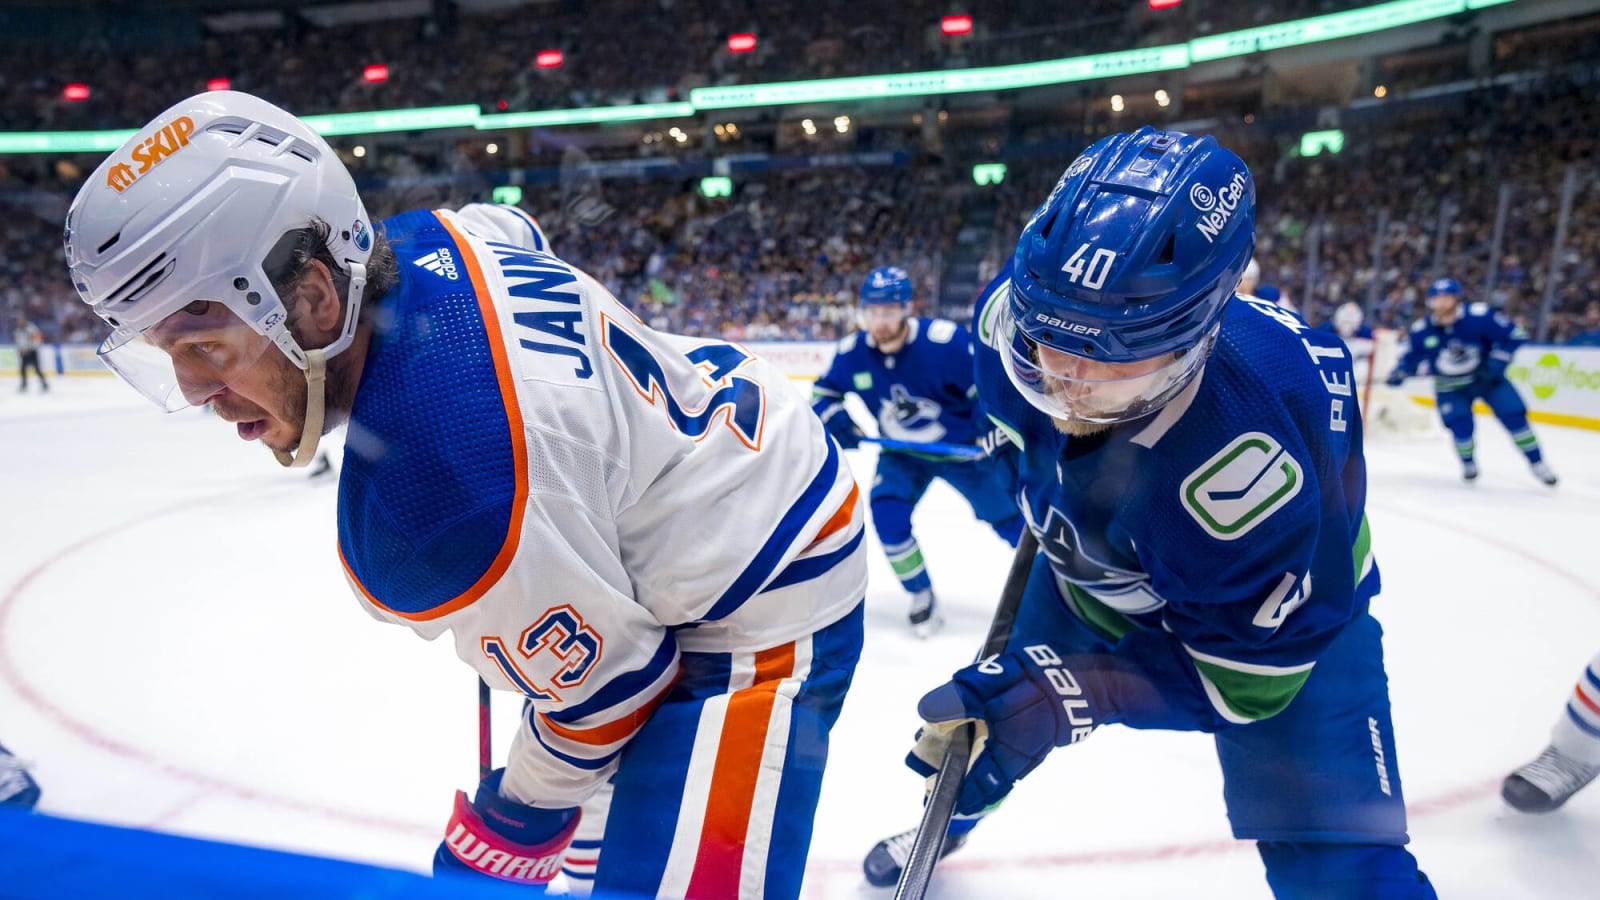 Canucks-Oilers: Look to the total in a tight Game 7 